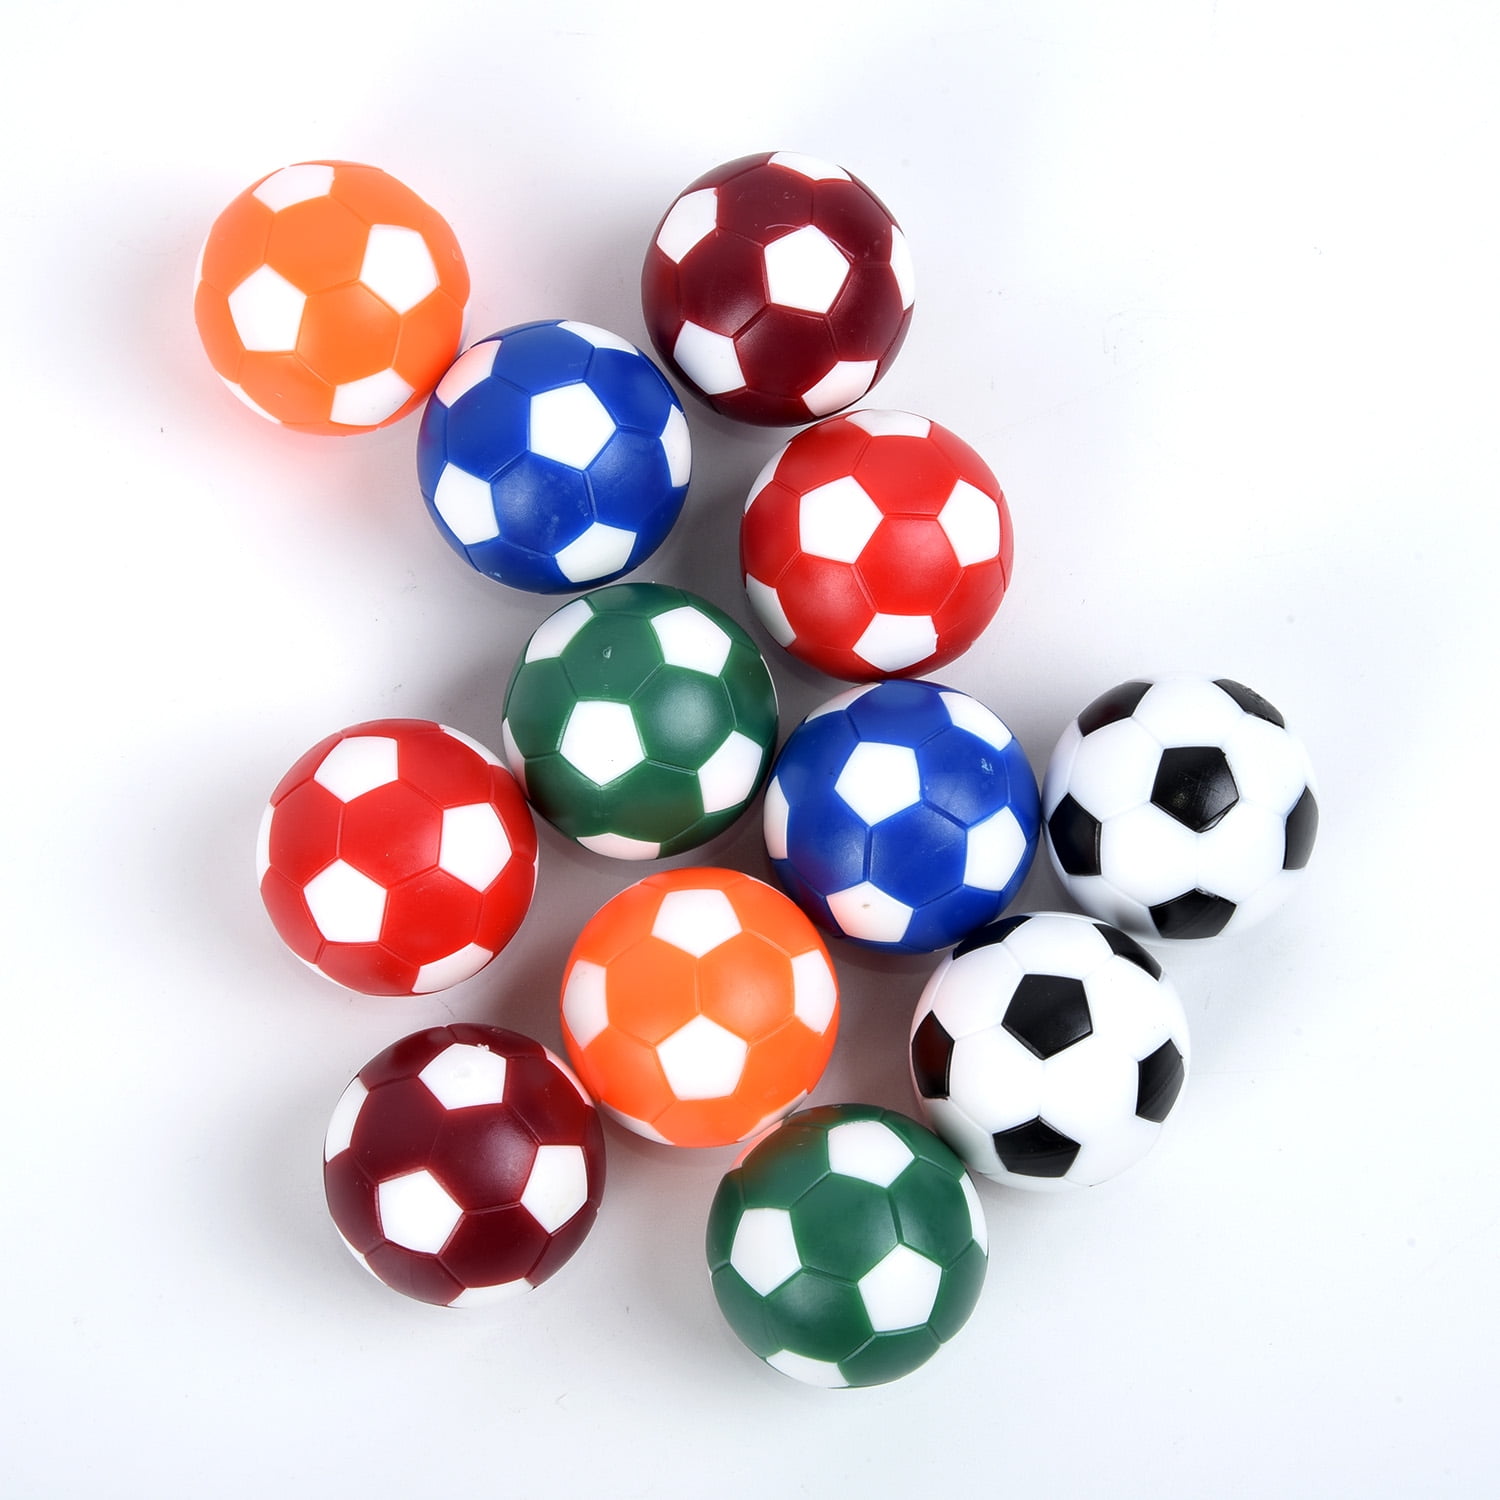 1pc 36mm Roughened Surface Foosball Table Ball Soccer Baby Foot Fussball Plastic 